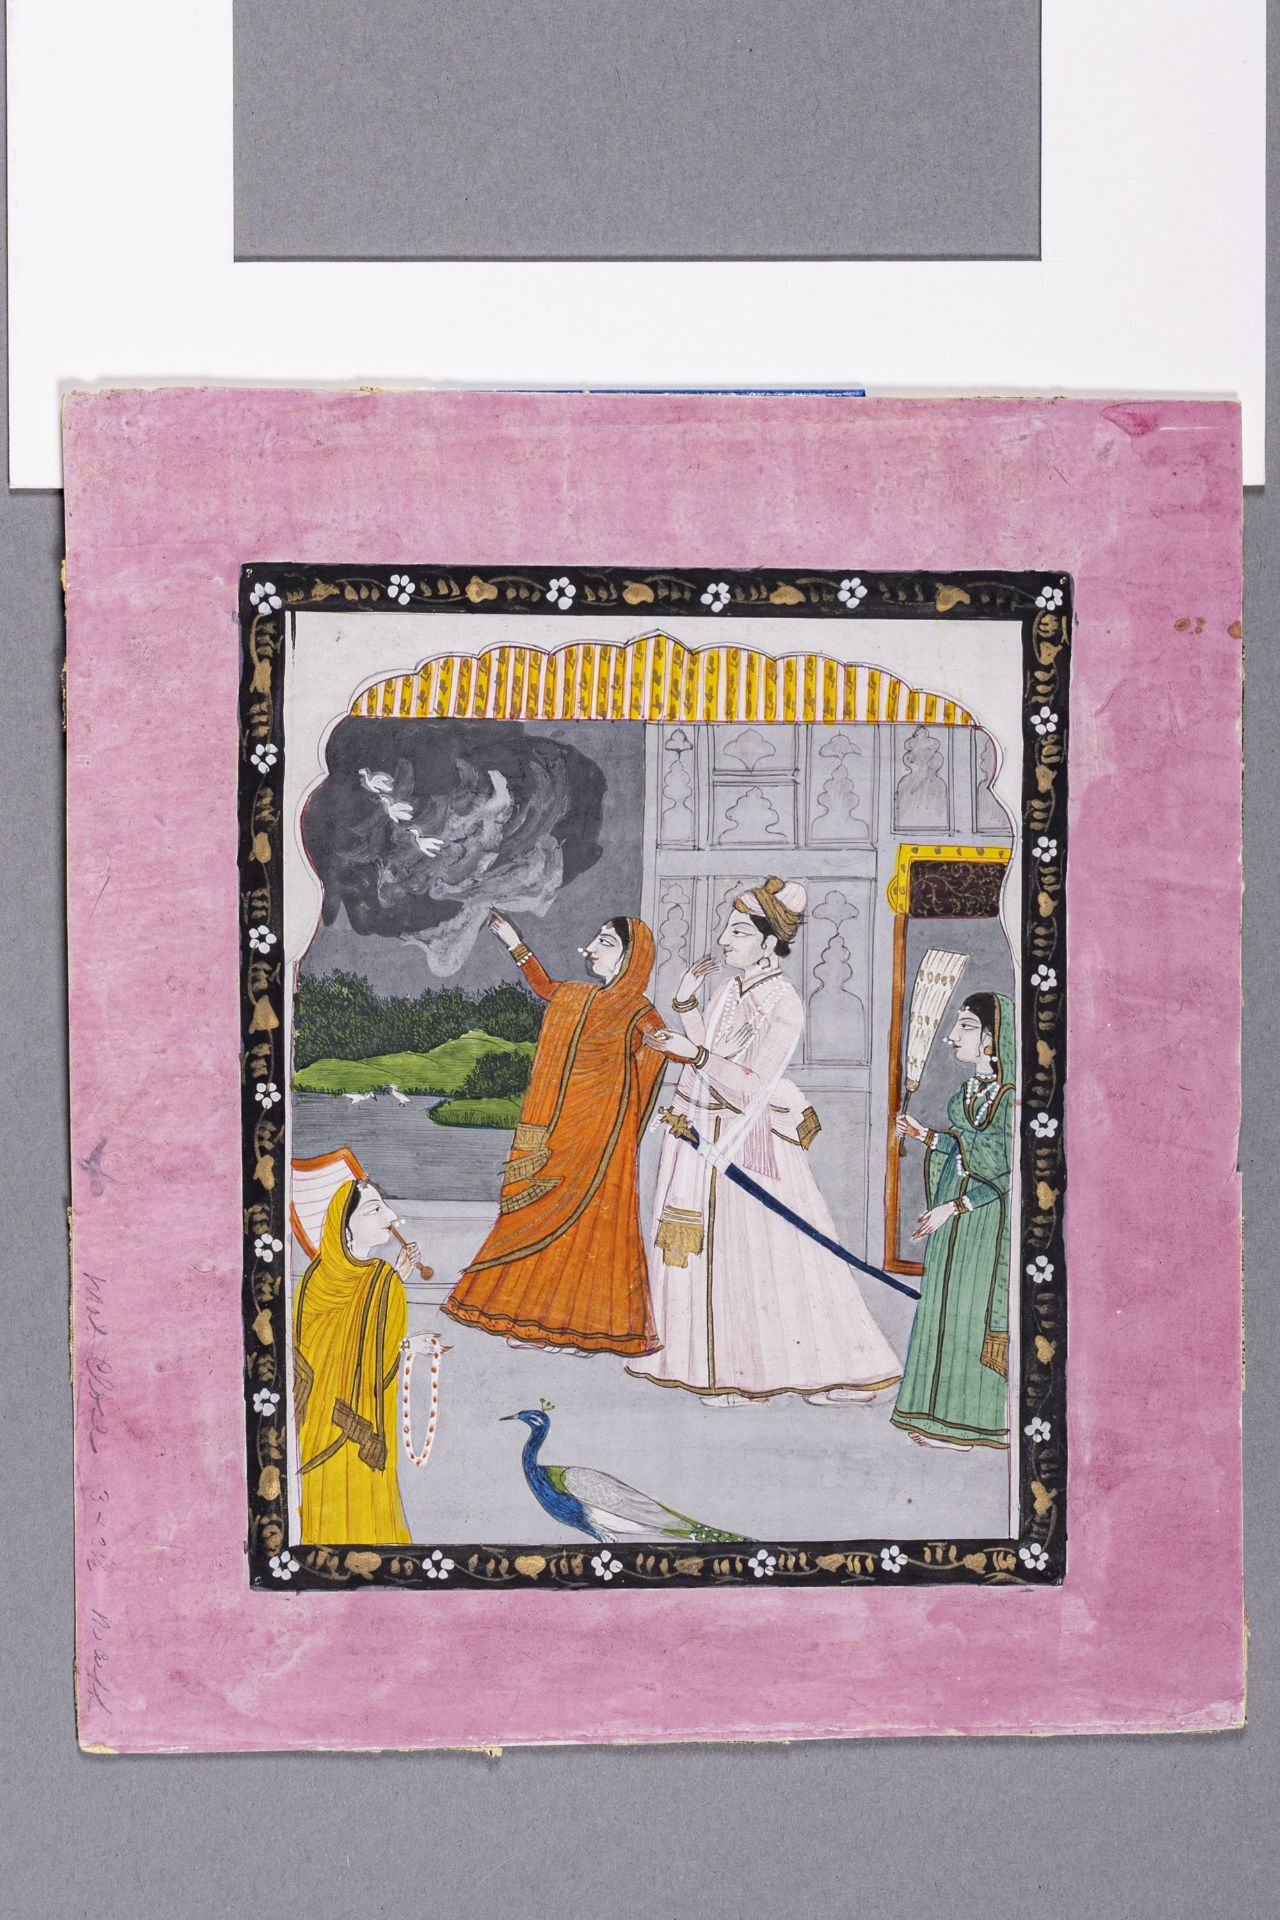 AN INDIAN MINIATURE PAINTING OF A NOBLE COUPLE, c. 1900s - Image 3 of 5